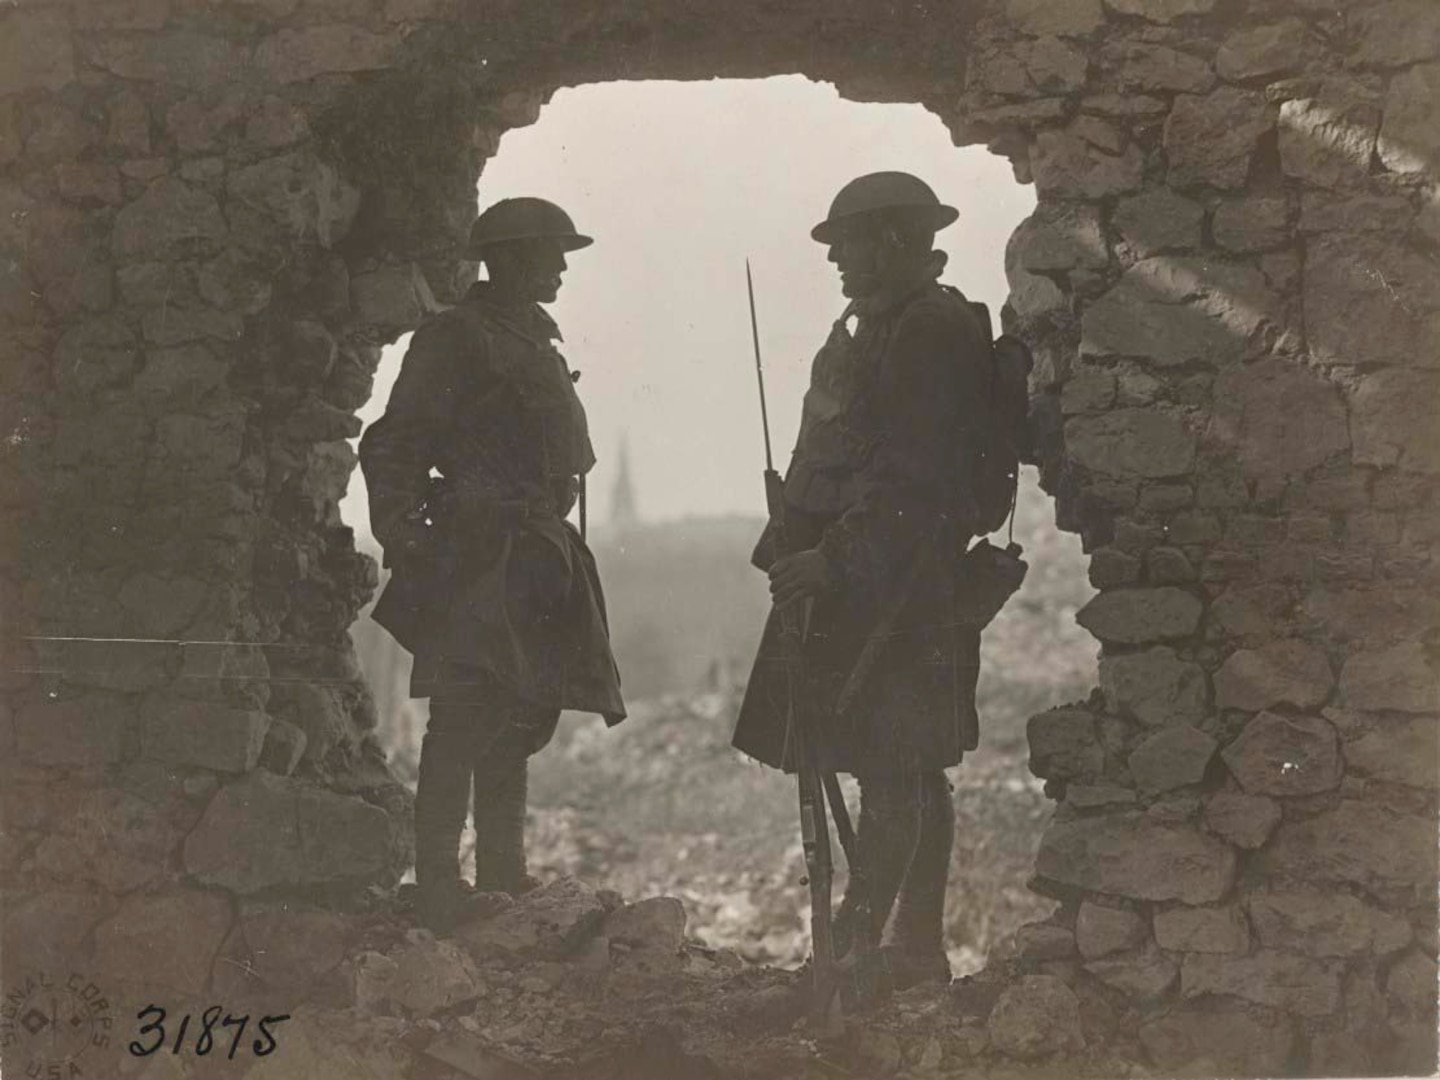 Soldiers of the  107th Infantry, 27th Division, on guard at old French chatea east of St. Souplet, Nord, France on  Oct. 19, 1918. The New York National Guardsmen of the 27th Division took tremendous casualties during the attack on the Hindenburg Line in the last 100 days of  World War I. The fighting ended on Nov. 11, 1918.